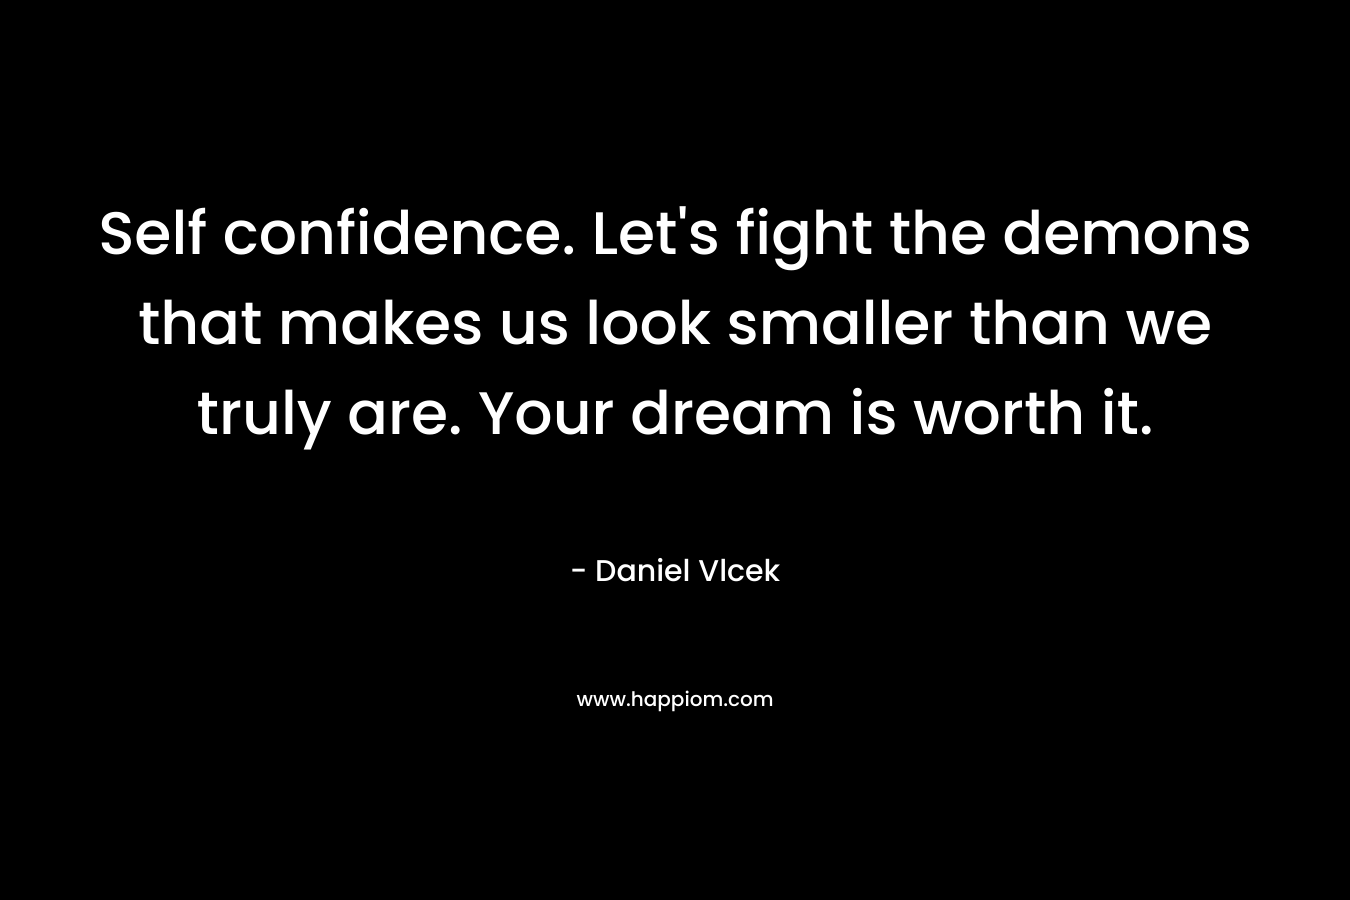 Self confidence. Let's fight the demons that makes us look smaller than we truly are. Your dream is worth it.